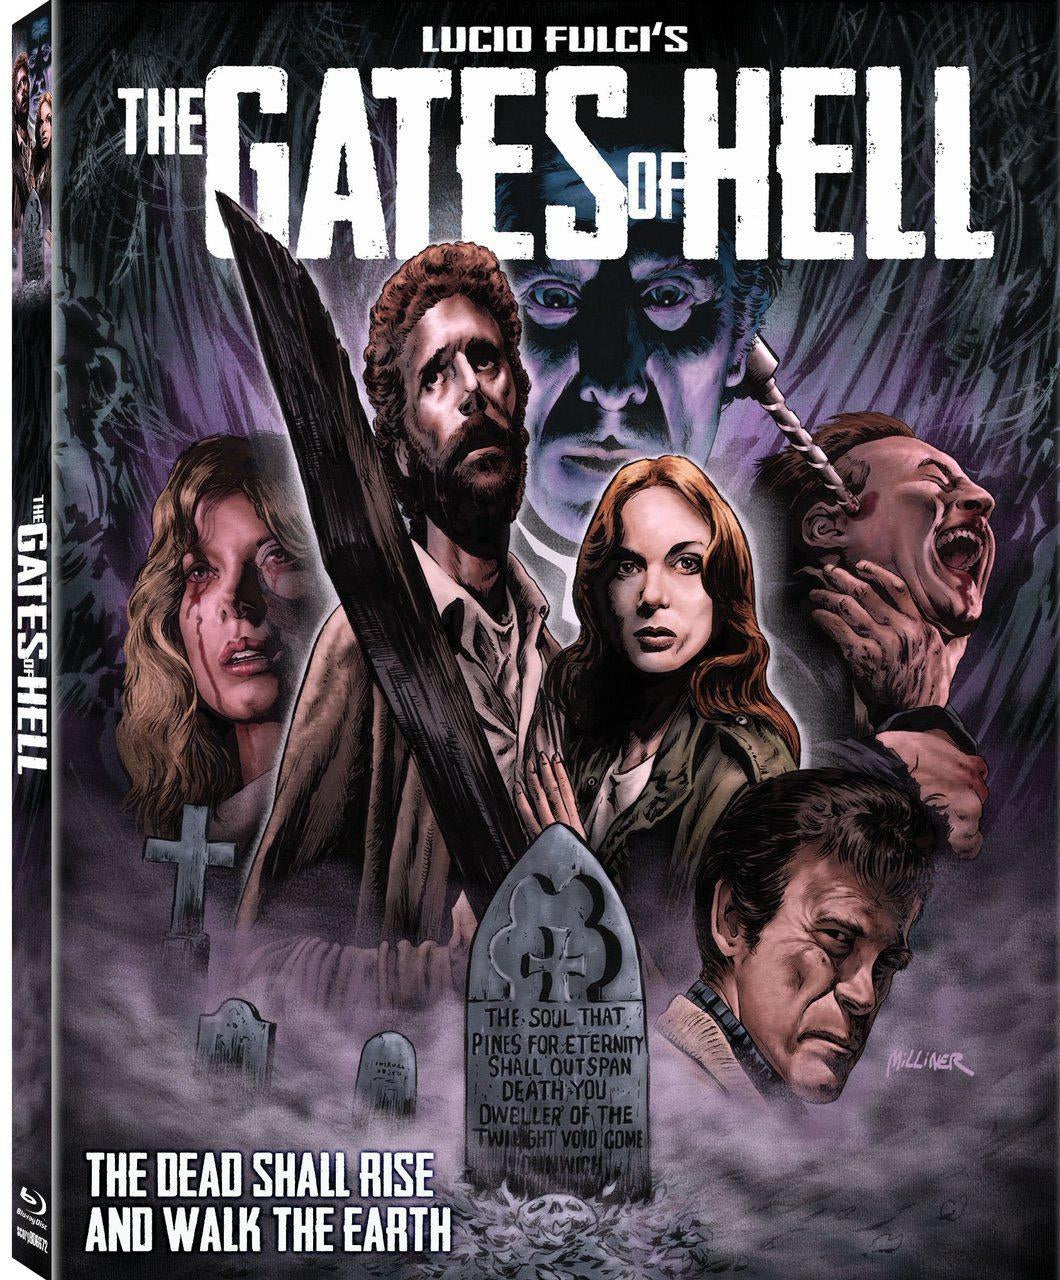 Hell of the Living Dead (Region Free UHD with Region B Blu-ray) [Import]  With Blu-ray, United Kingdom - Import on .com